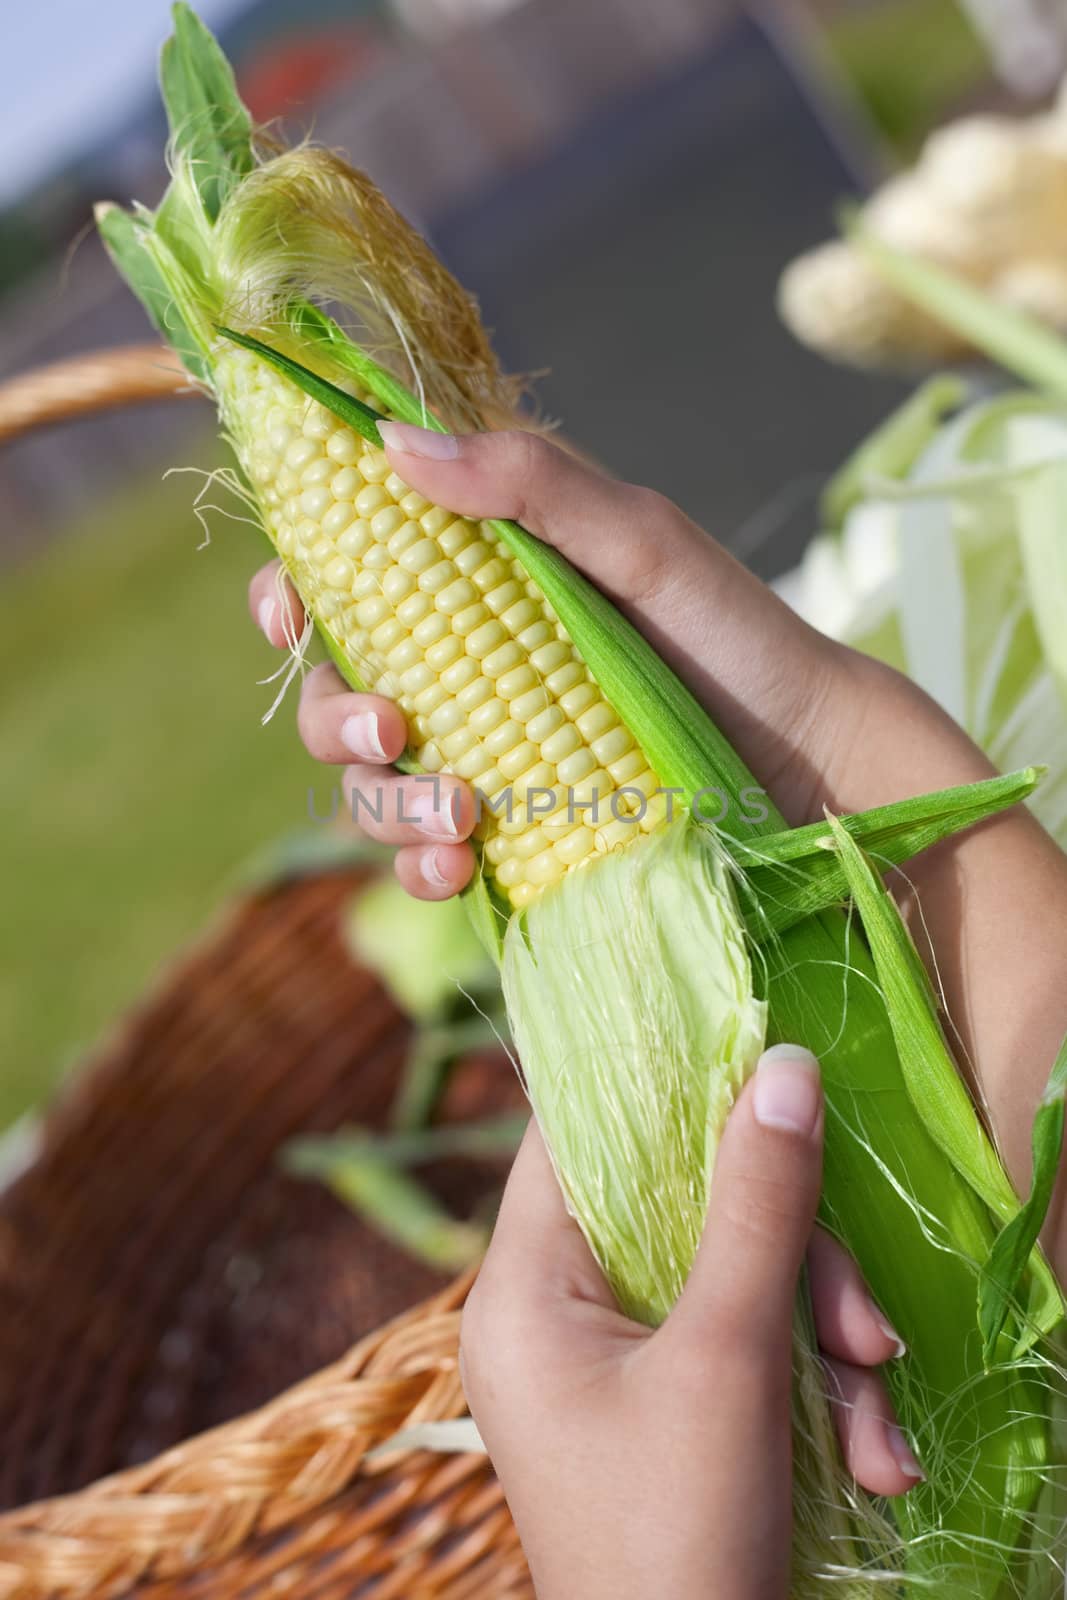 Hands holding a ripe ear of corn